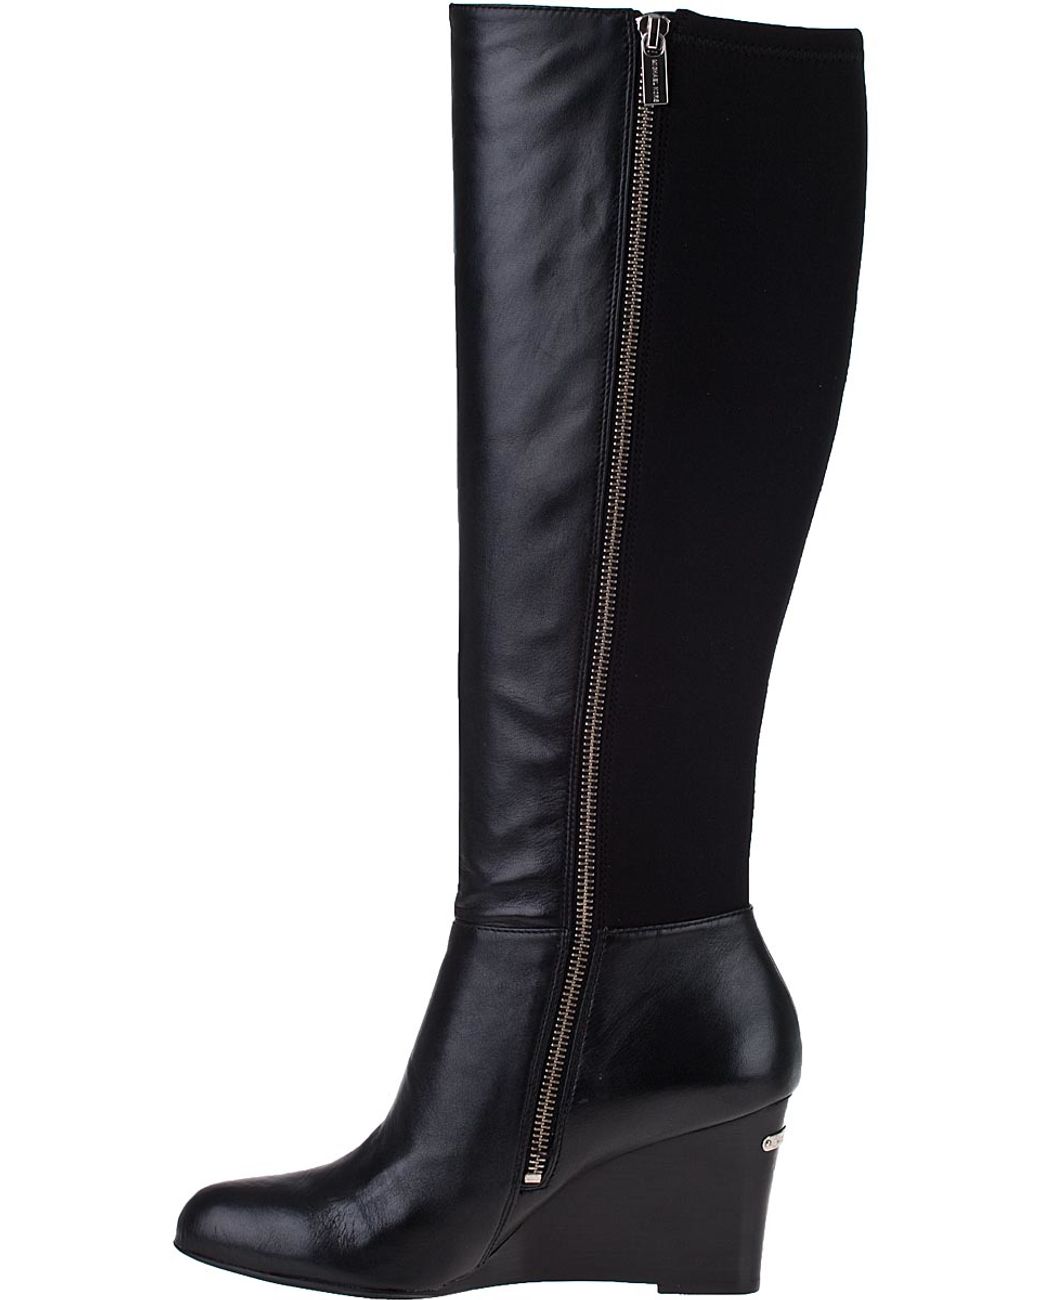 MICHAEL Michael Kors Bromley Wedge Tall Boot Black Leather | Lyst